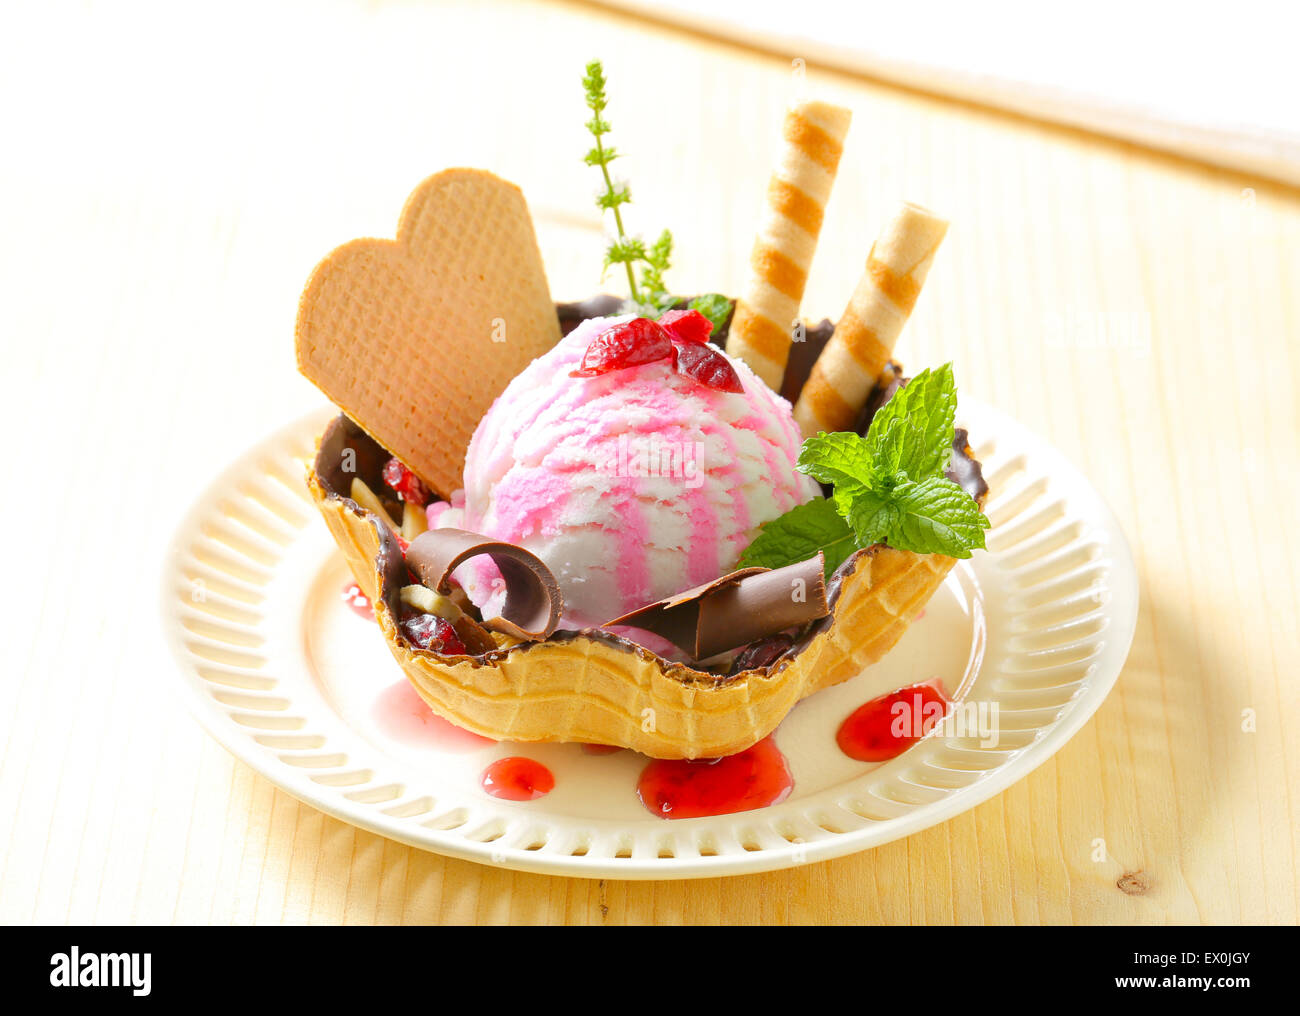 Ice cream served in waffle basket Stock Photo